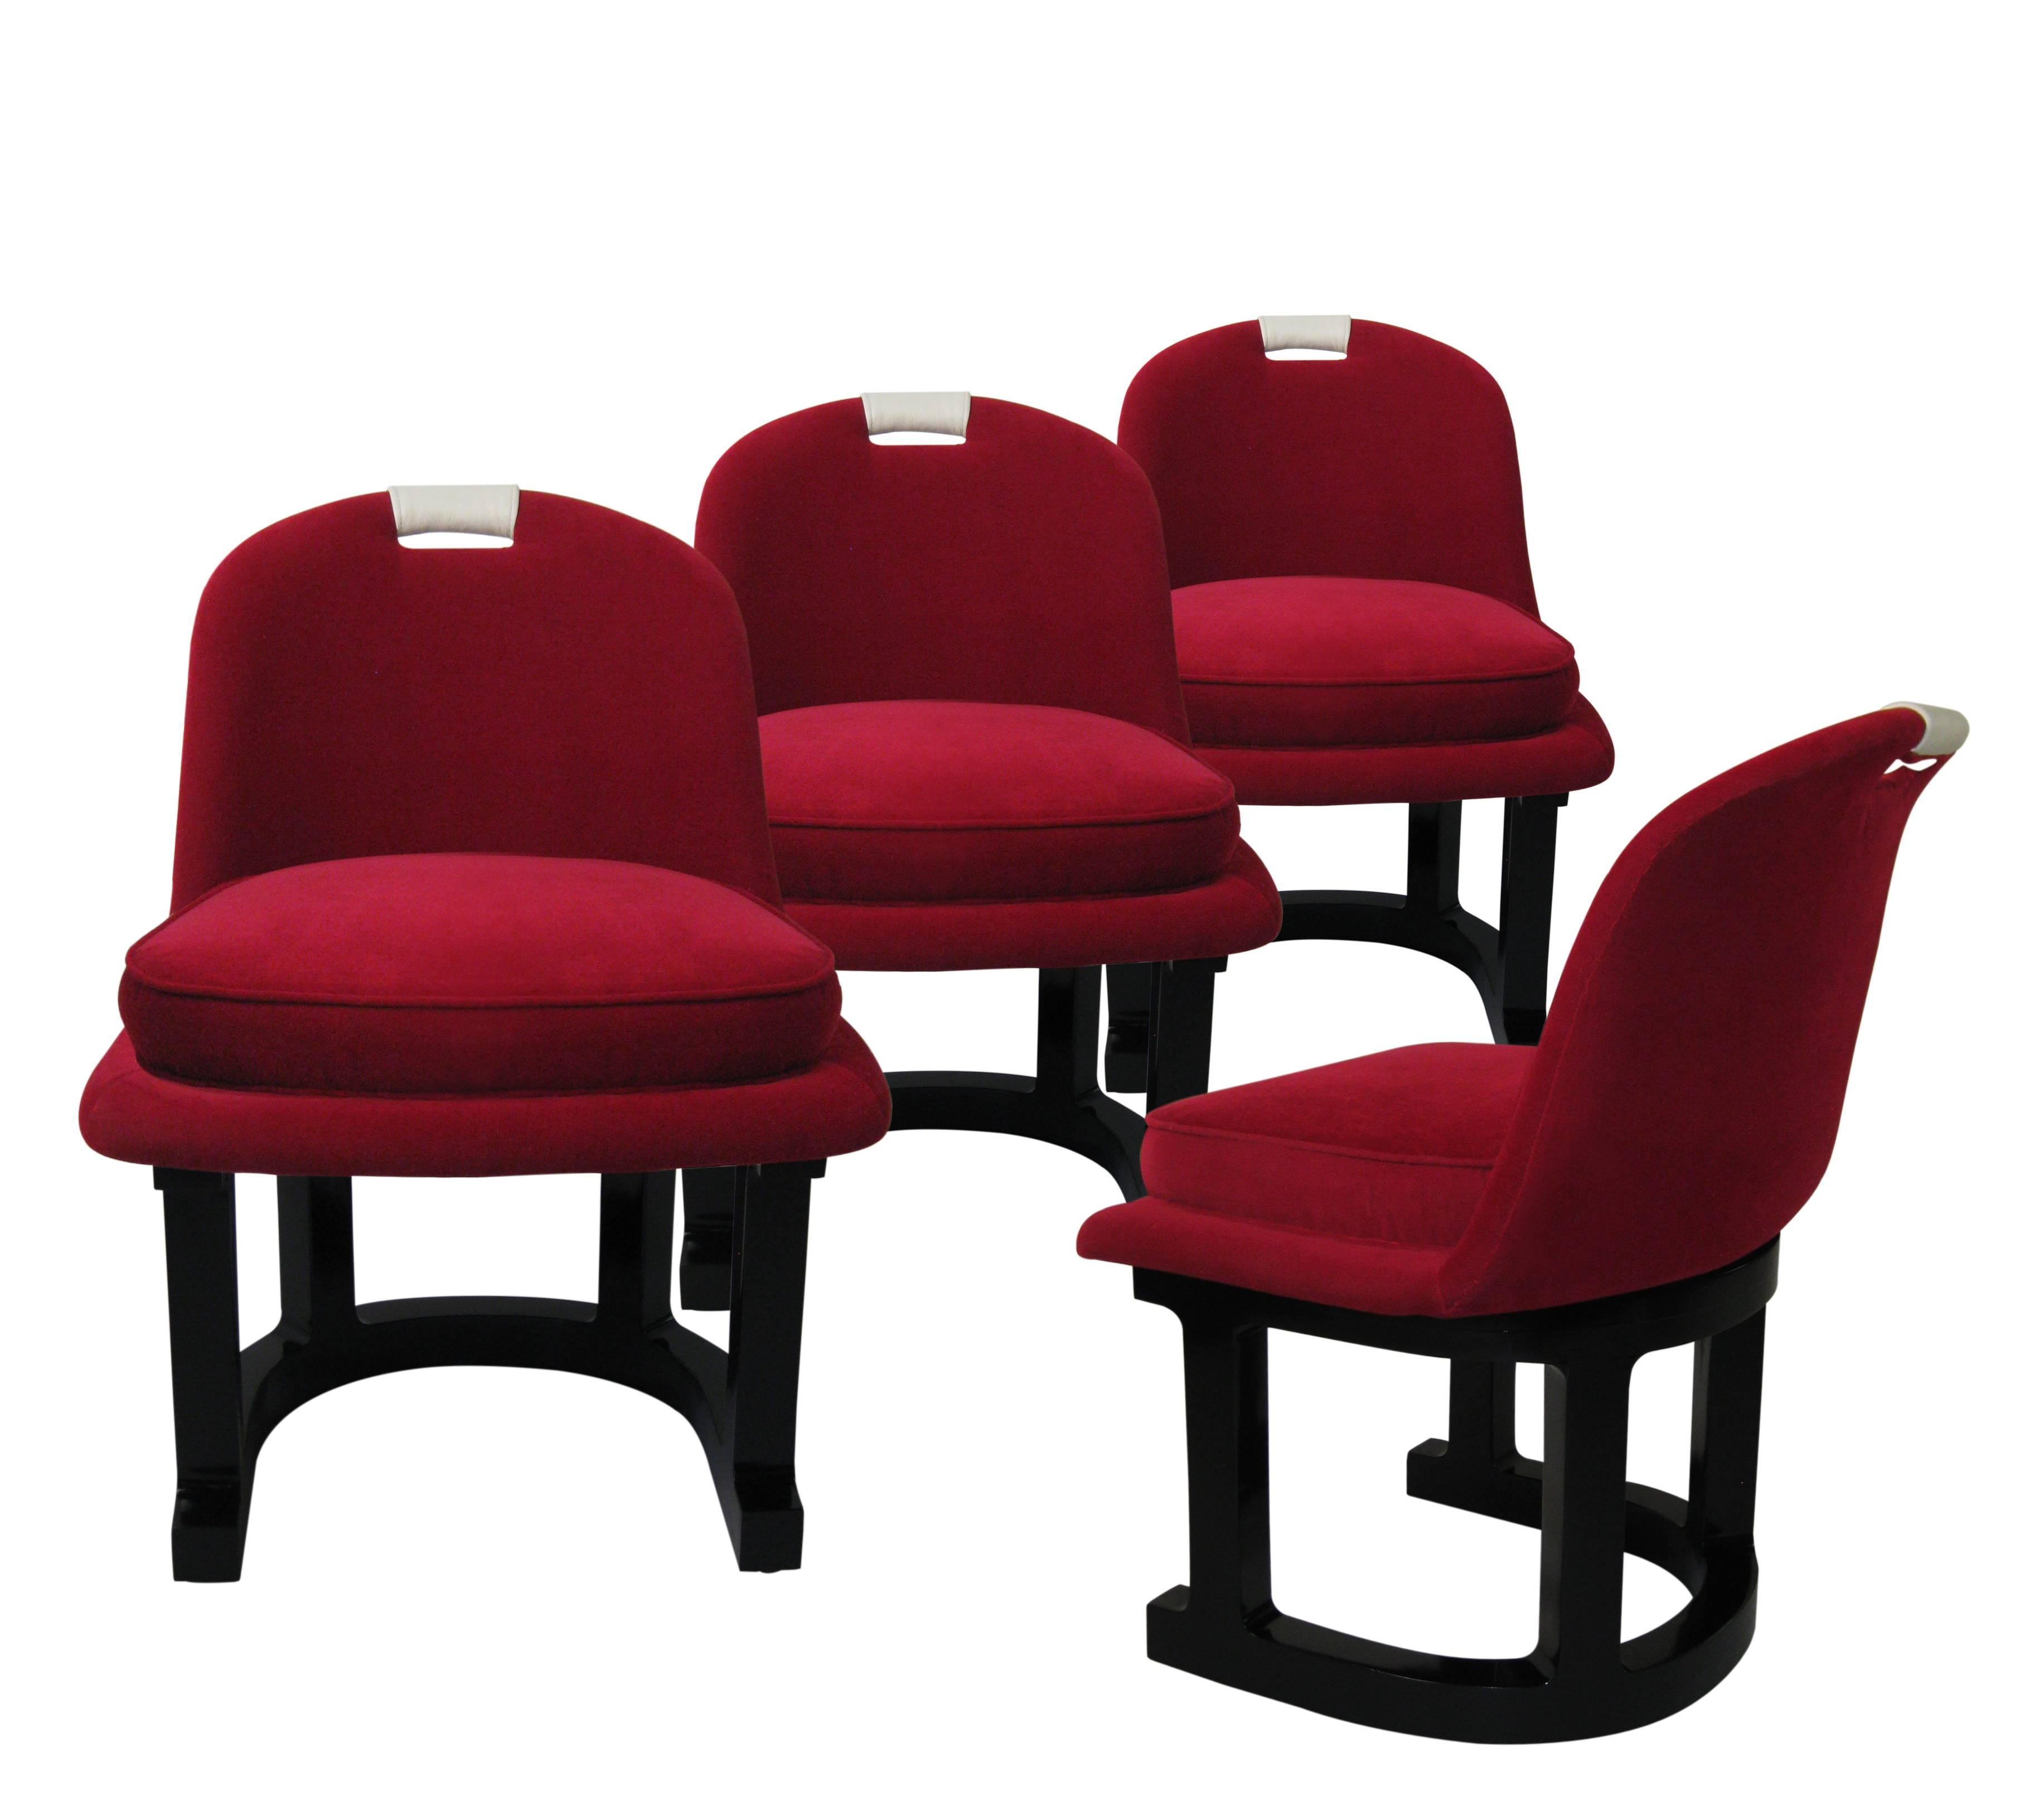 Set of Four Chairs Fiberglass Frame, Velvet Leather and Lacquer, USA, circa 1960 For Sale